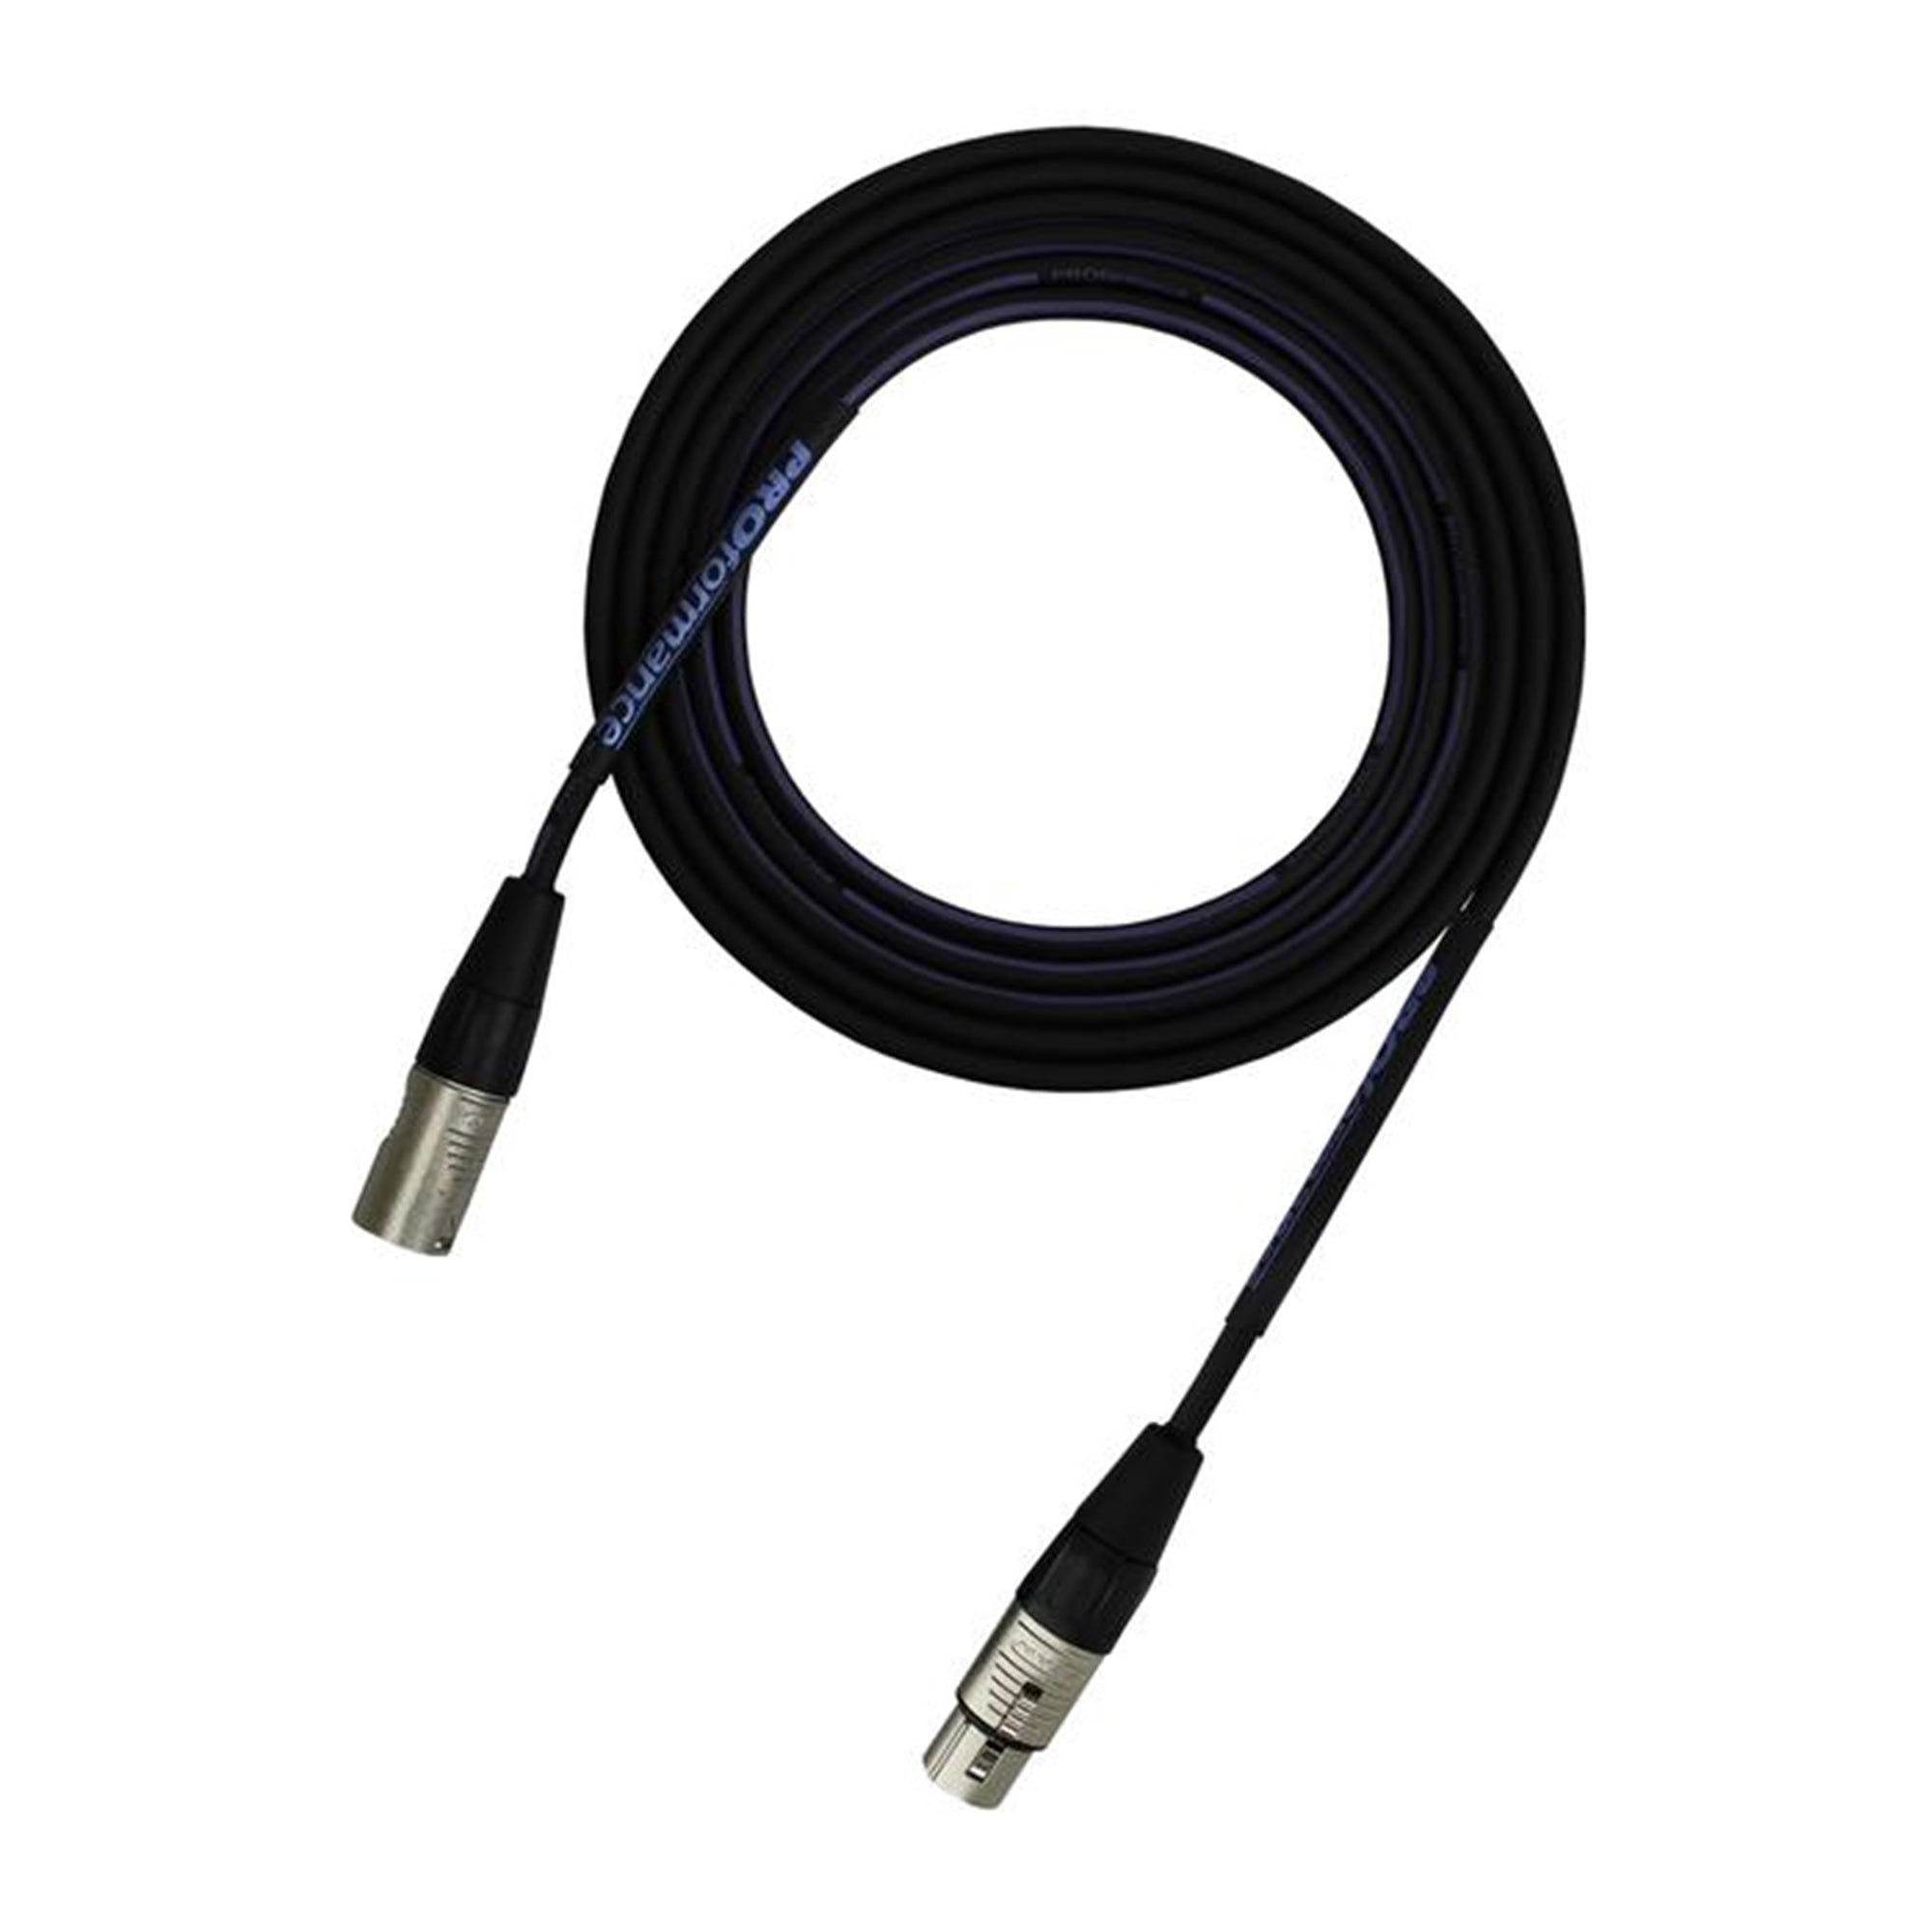 PROformance AJP10 10' Microphone Cable